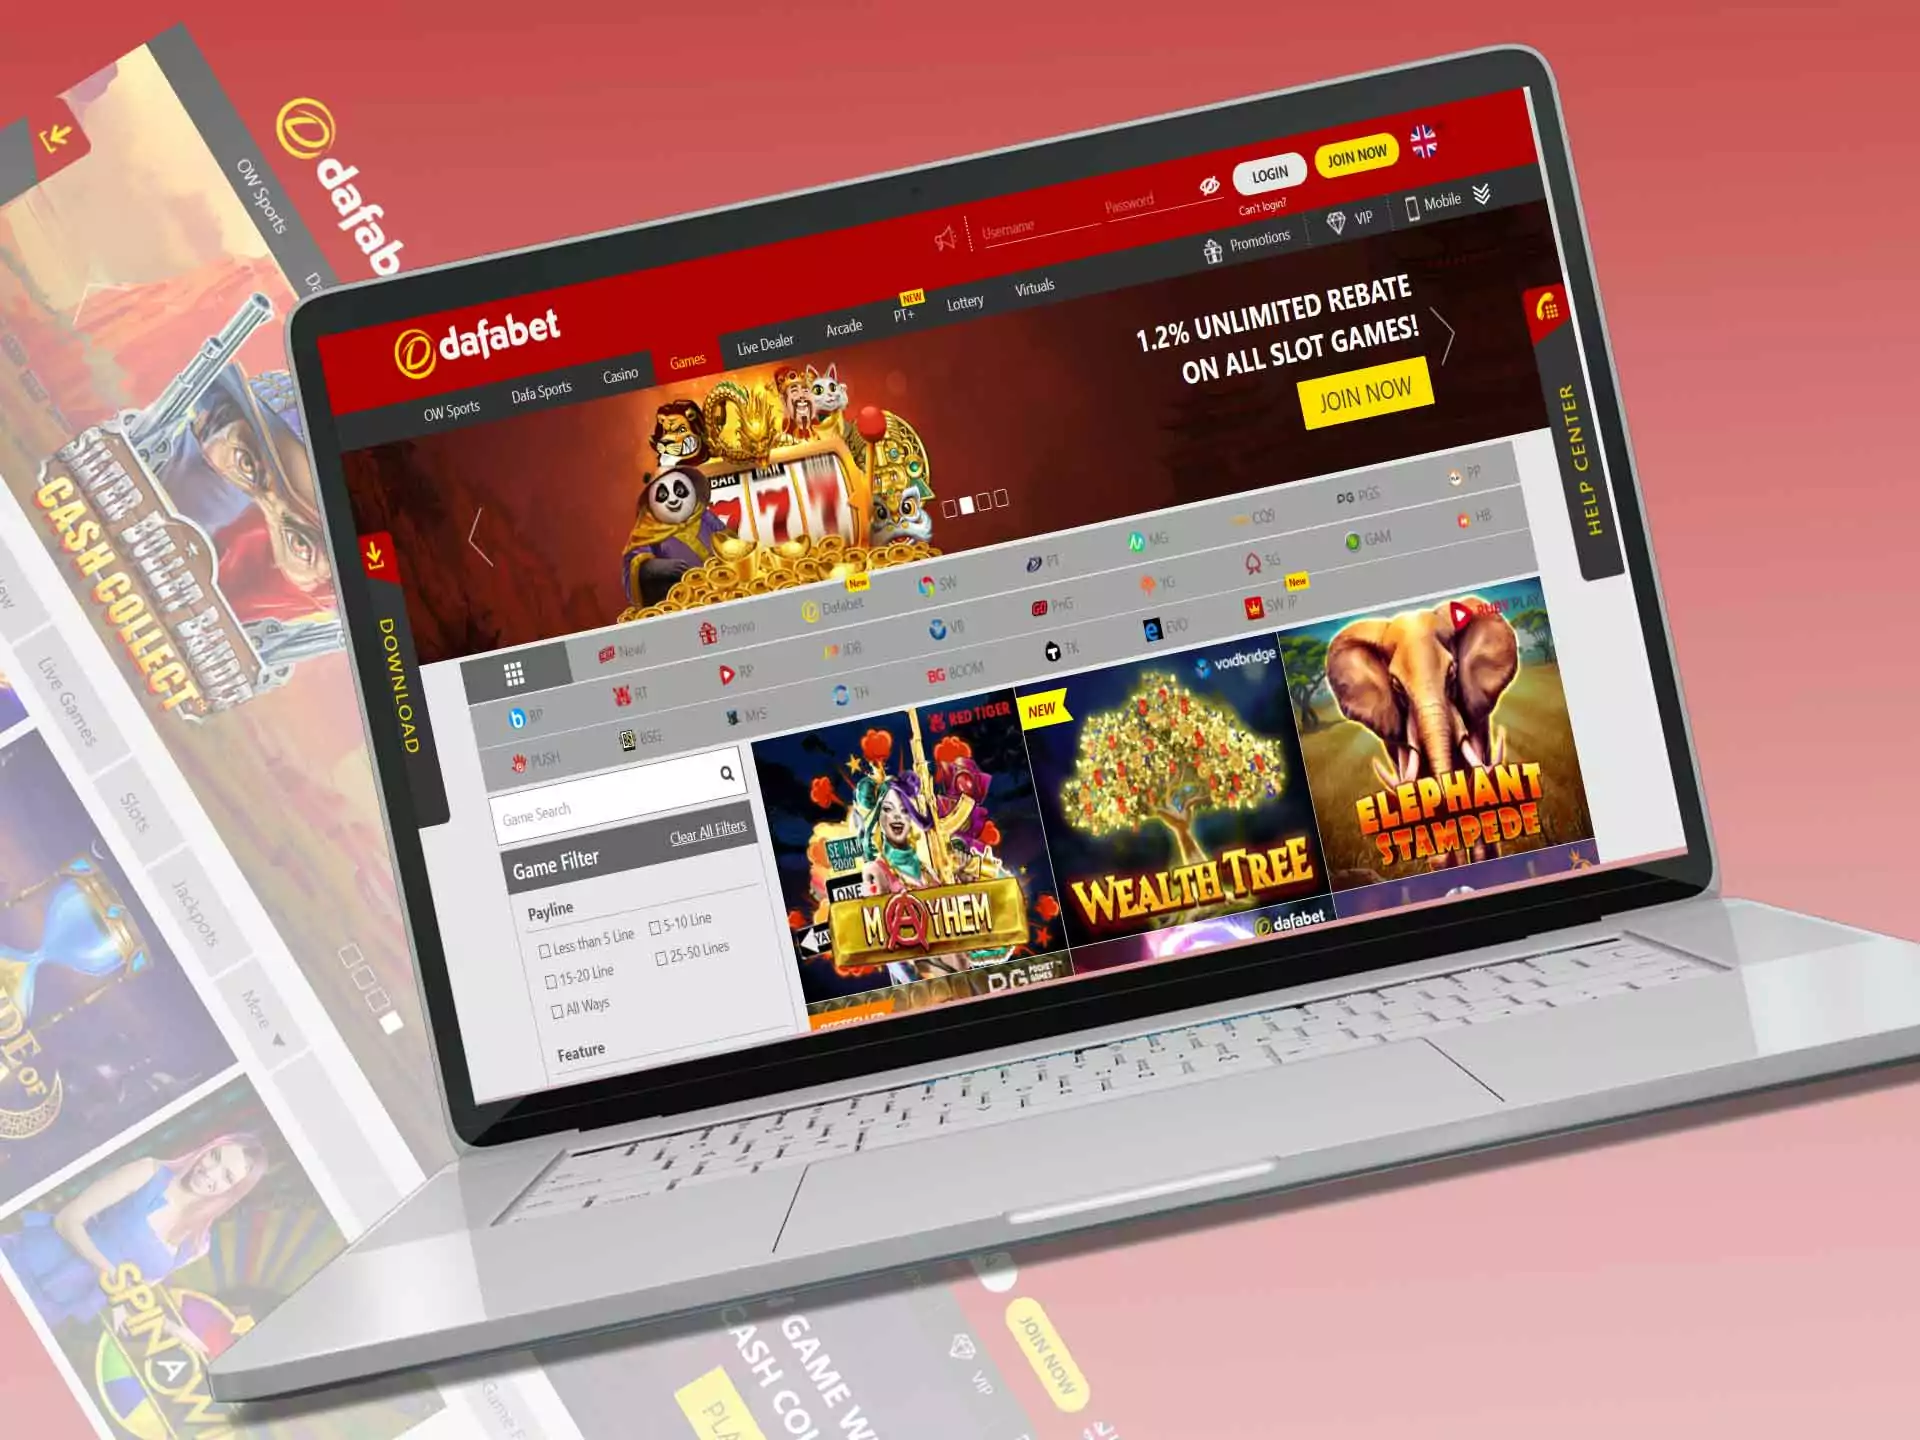 Download the Dafabet PC version on your laptop.